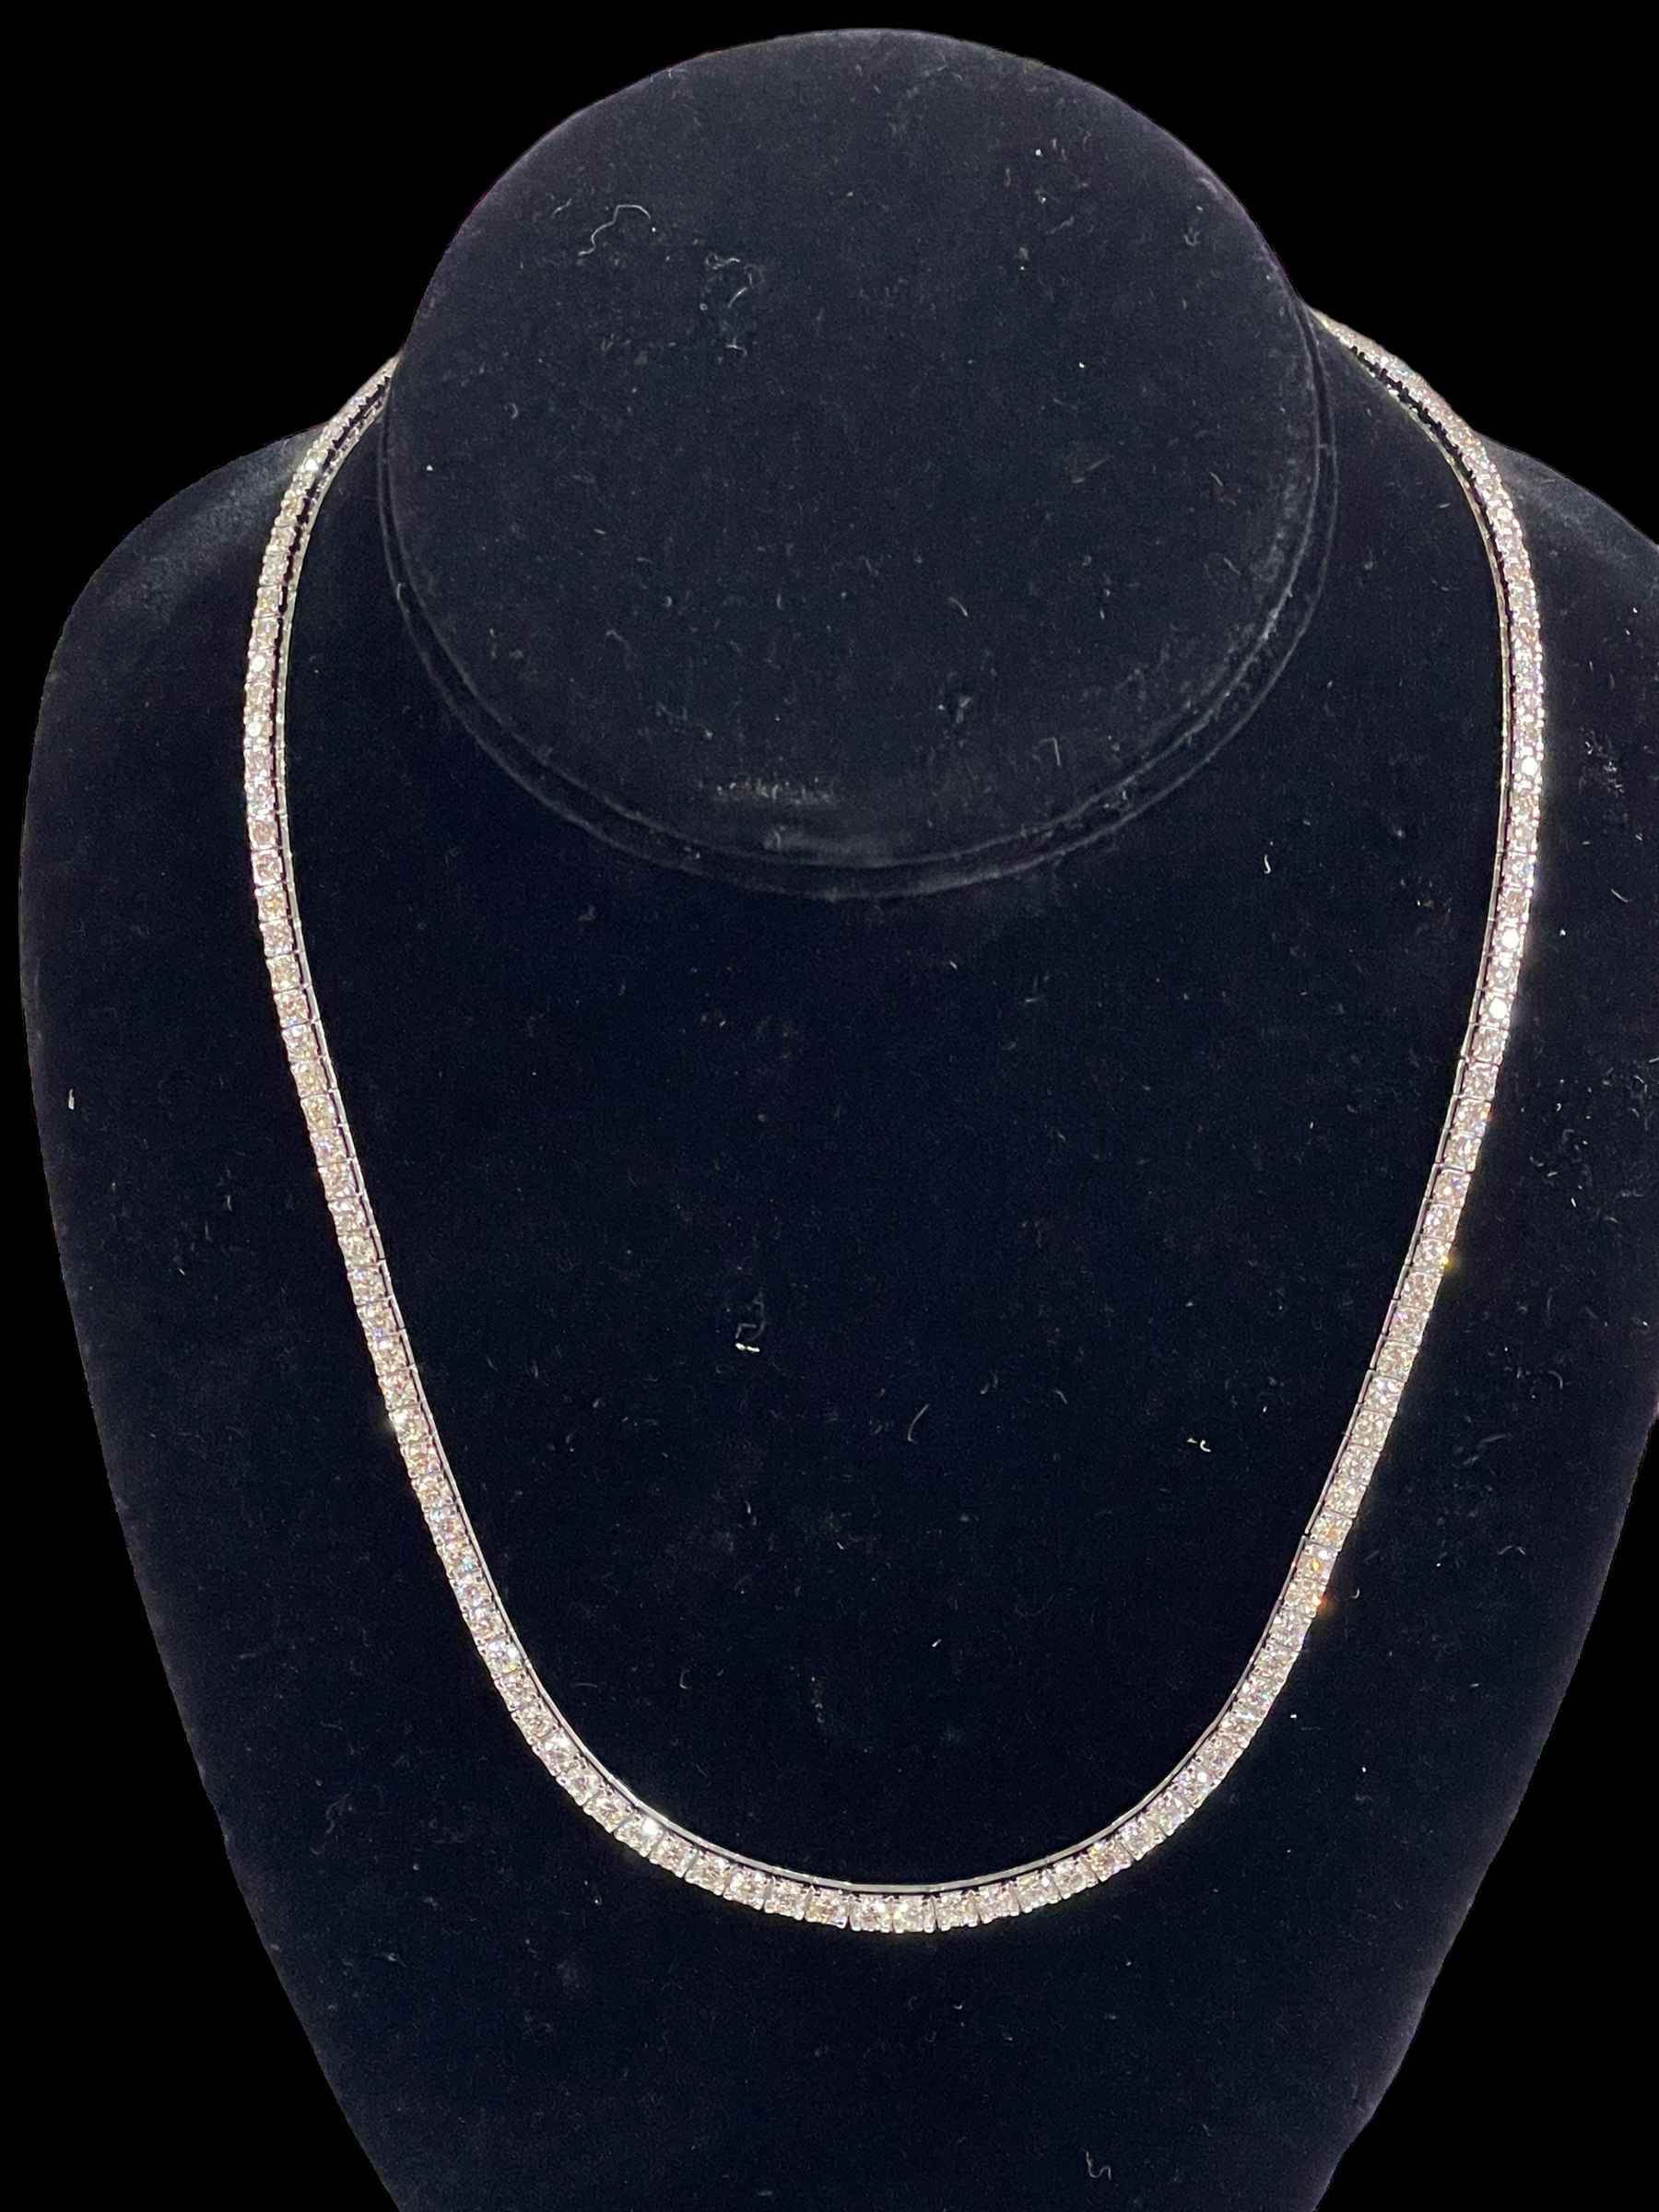 Excellent quality 18 carat white gold and diamond tennis style necklace, 46cm in length,